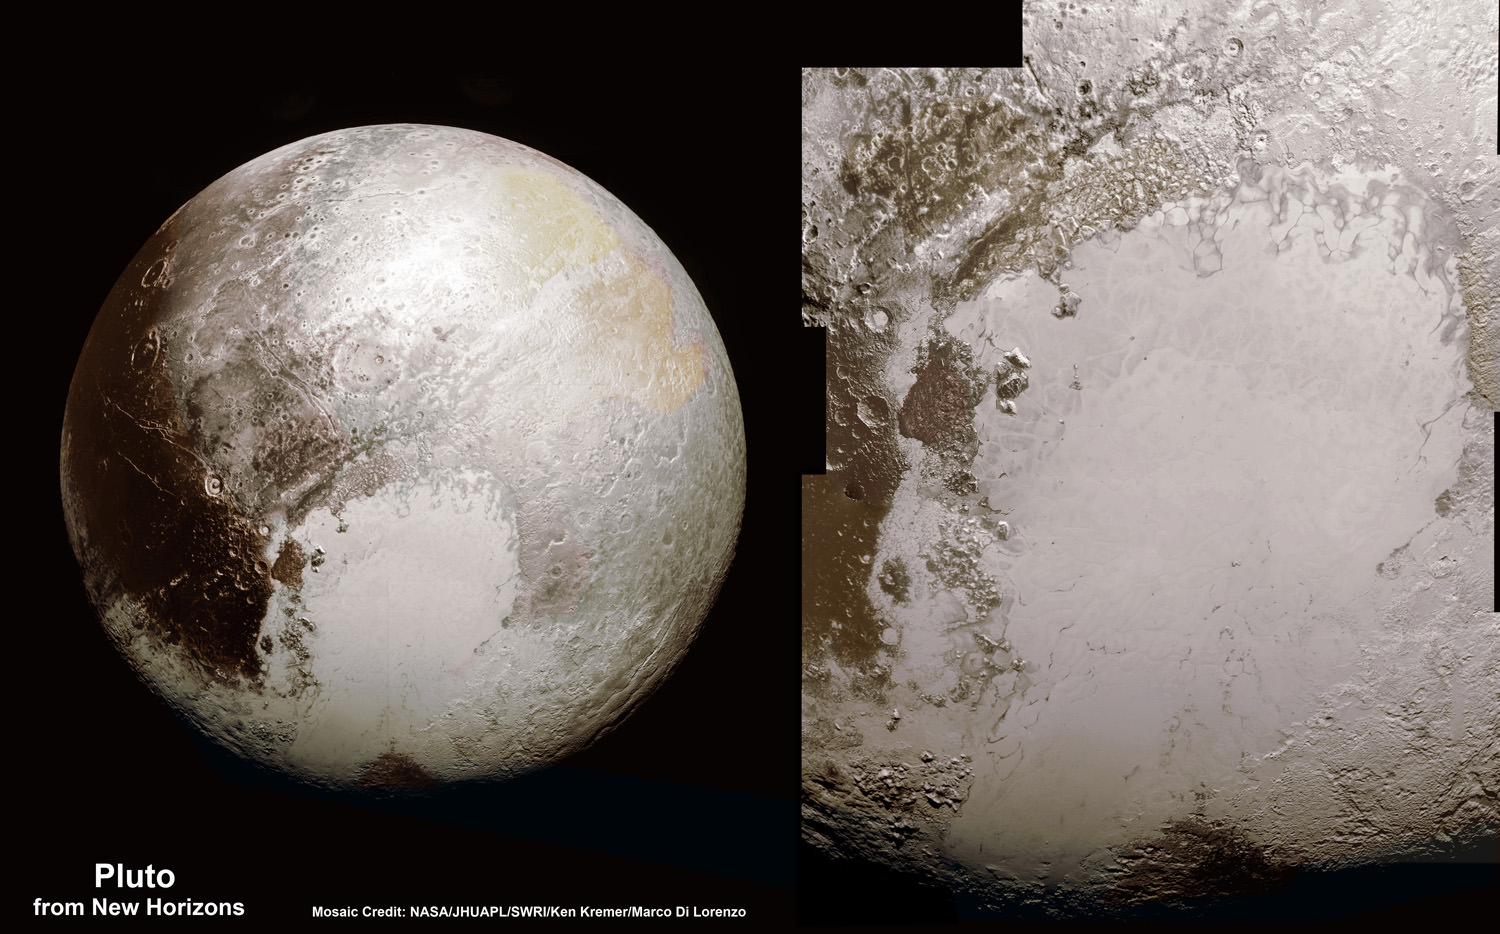 This global mosaic view of Pluto was created from the latest high-resolution images to be downlinked from NASA's New Horizons spacecraft and released on Sept. 11, 2015.   The images were taken as New Horizons flew past Pluto on July 14, 2015, from a distance of 50,000 miles (80,000 kilometers).  This mosaic was stitched from over two dozen raw images captured by the LORRI imager and colorized.  Right side mosaic comprises twelve highest resolution views of Tombaugh Regio heart shaped feature and shows objects as small as 0.5 miles (0.8 kilometers) in size.  Credits: NASA/Johns Hopkins University Applied Physics Laboratory/Southwest Research Institute/ Ken Kremer/kenkremer.com/Marco Di Lorenzo